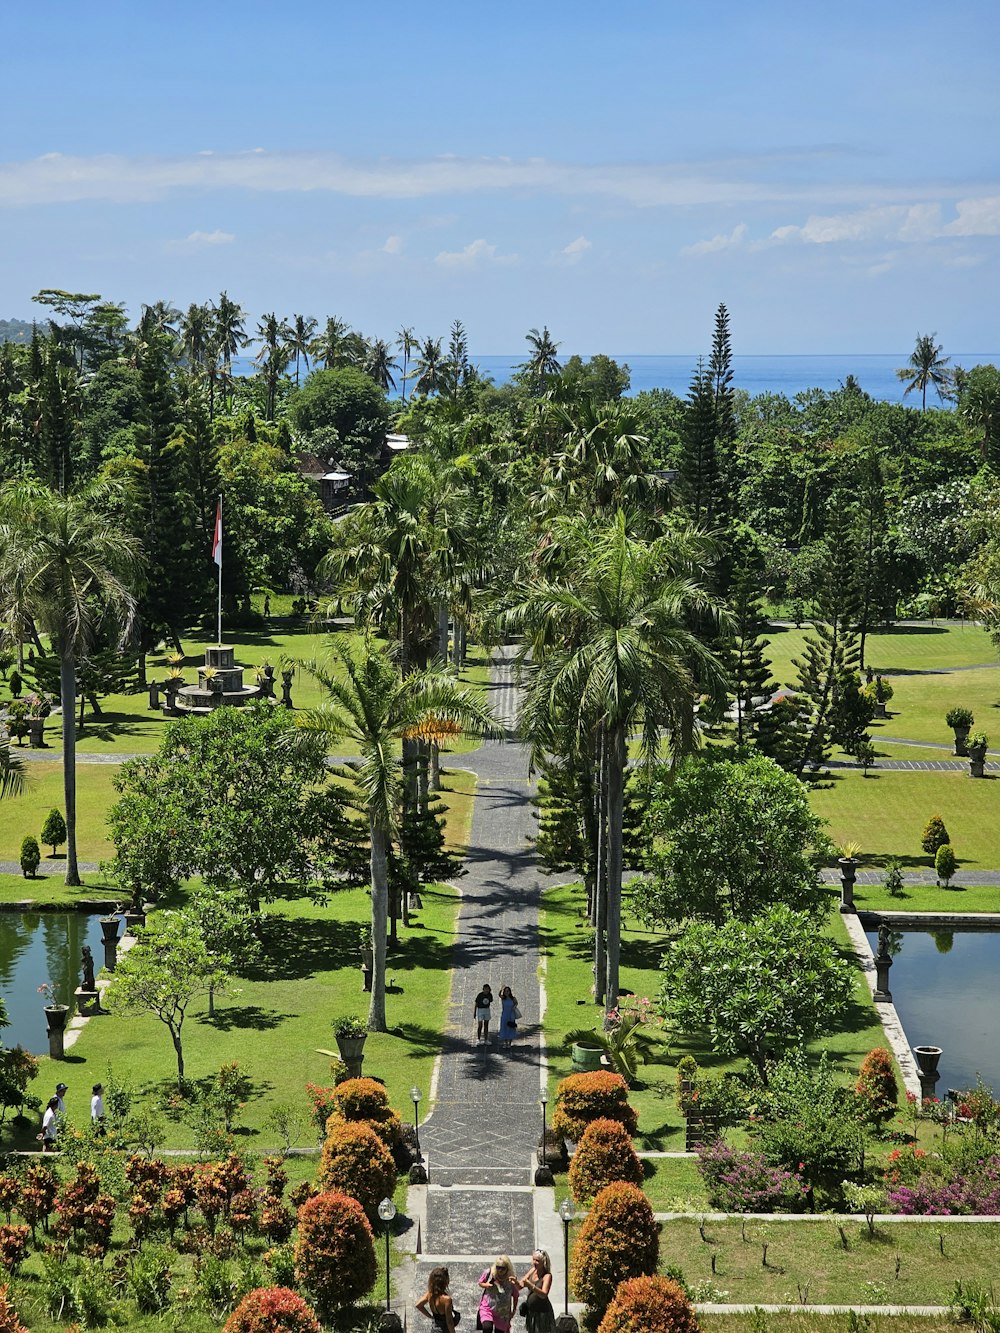 a view of a park with a lot of trees